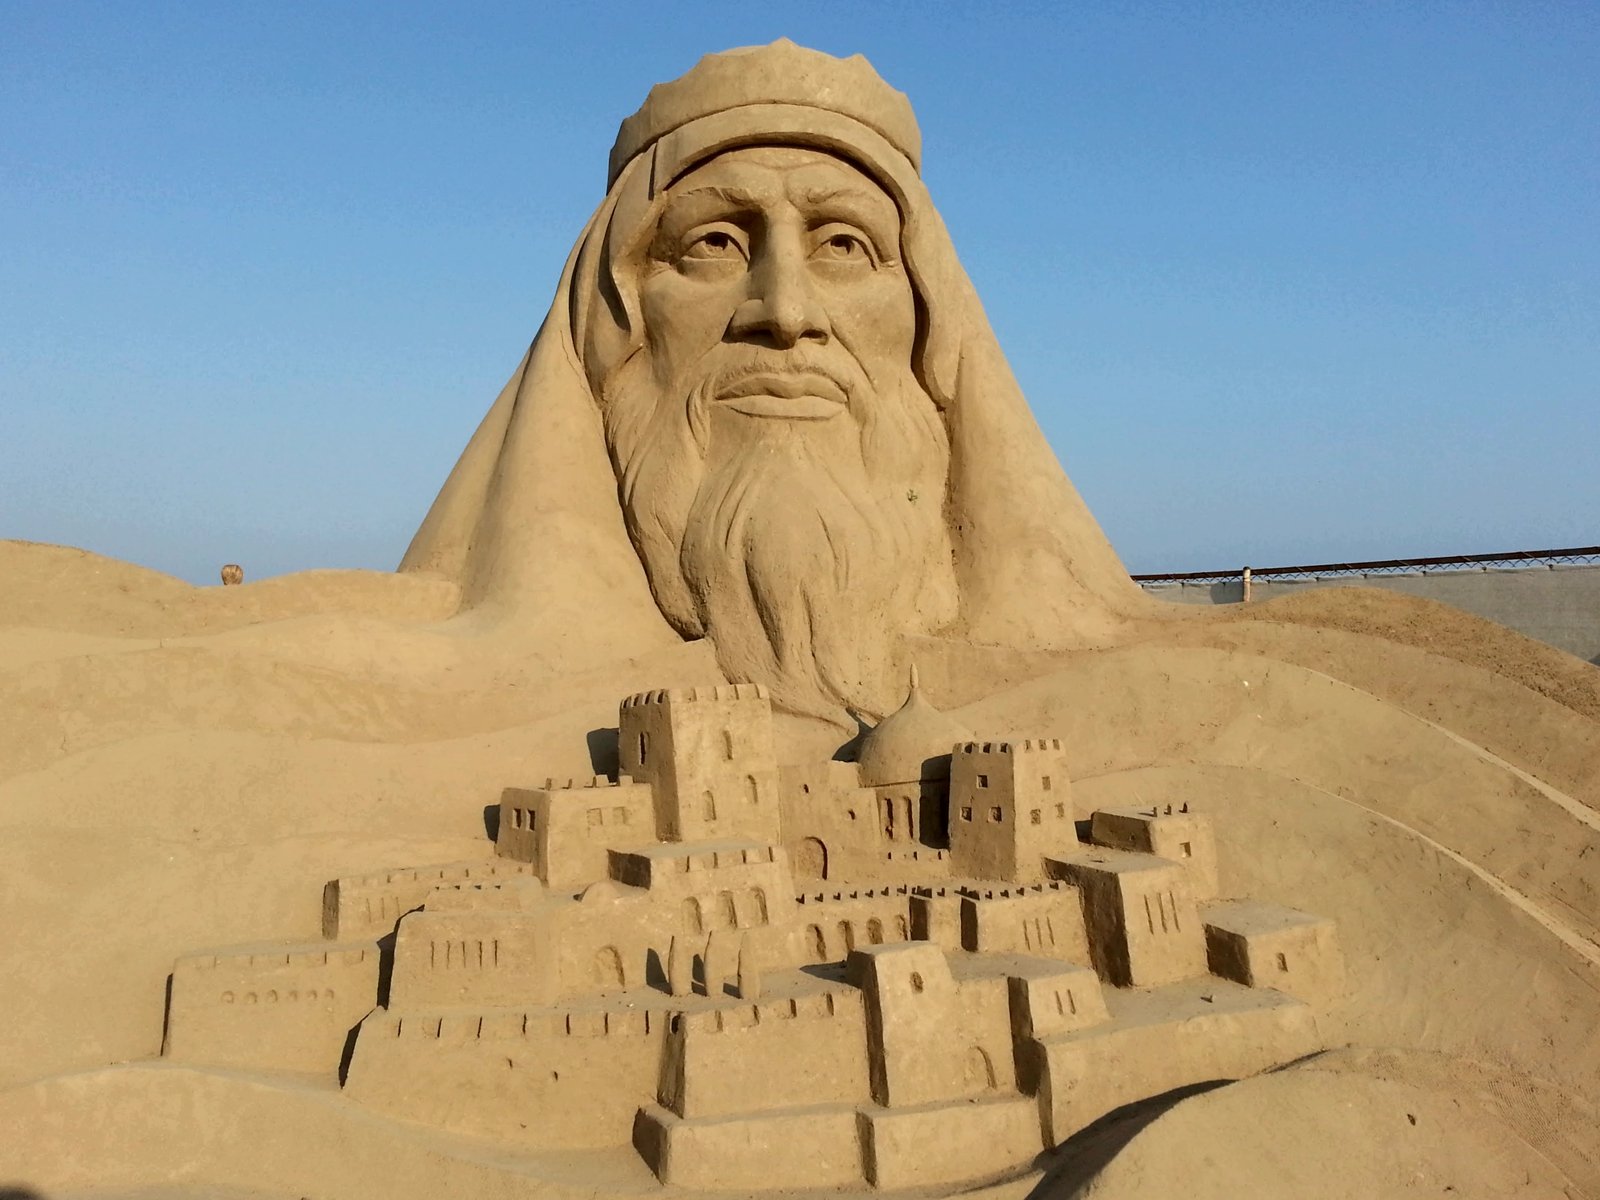 How to see incredible sand sculptures in Antalya